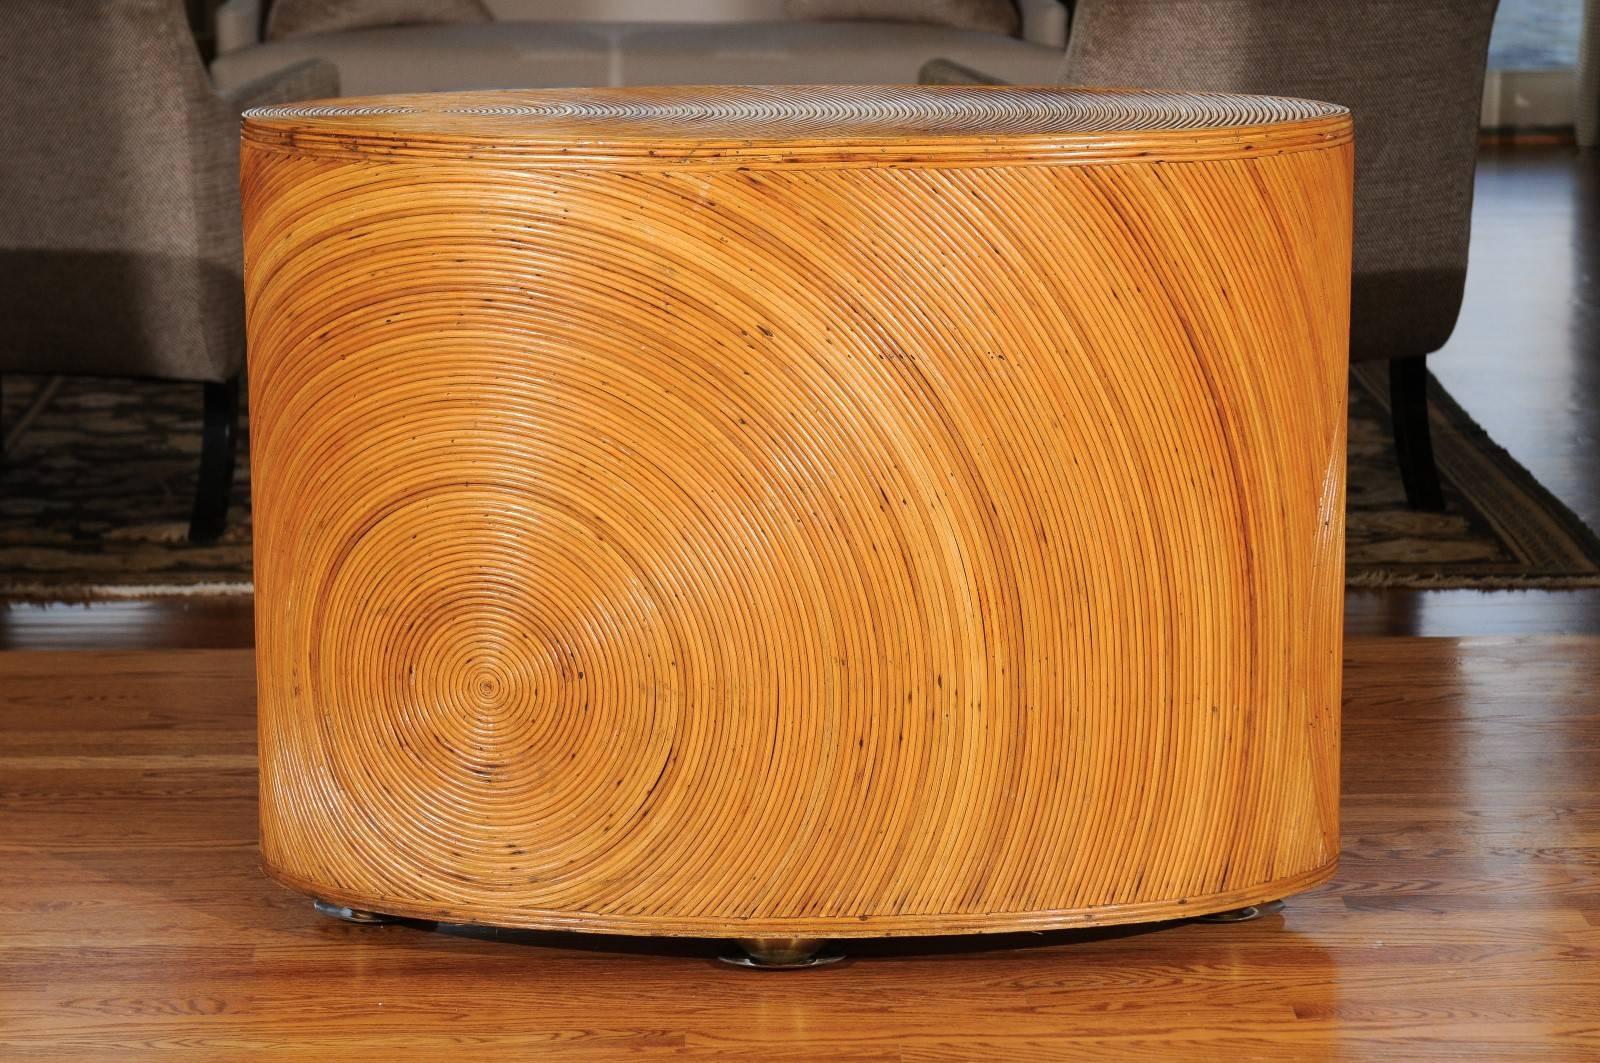 A stunning fixed console, circa 1970. Fabulous oval mahogany construction, painstakingly veneered in pencil bamboo. The piece is mounted atop stylish brass feet. Swirling sunburst motifs accent the sides and top. Exceptional style, quality and